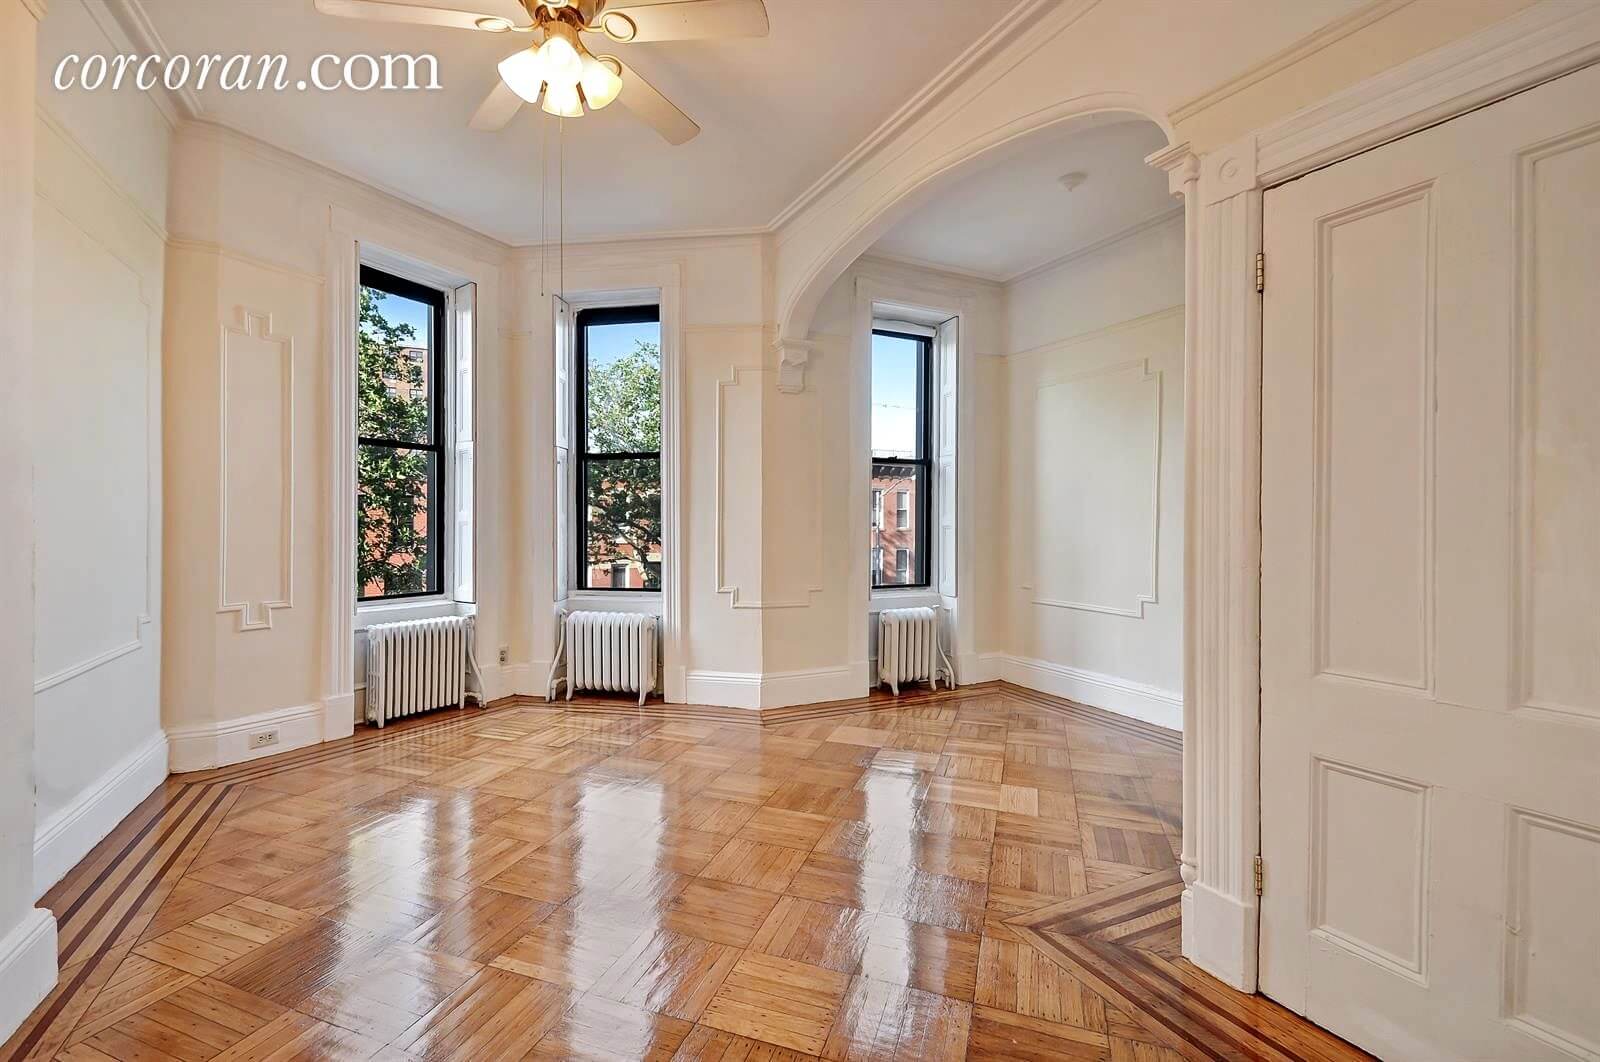 Brooklyn Homes for Sale in Park Slope, Windsor Terrace, Bed Stuy